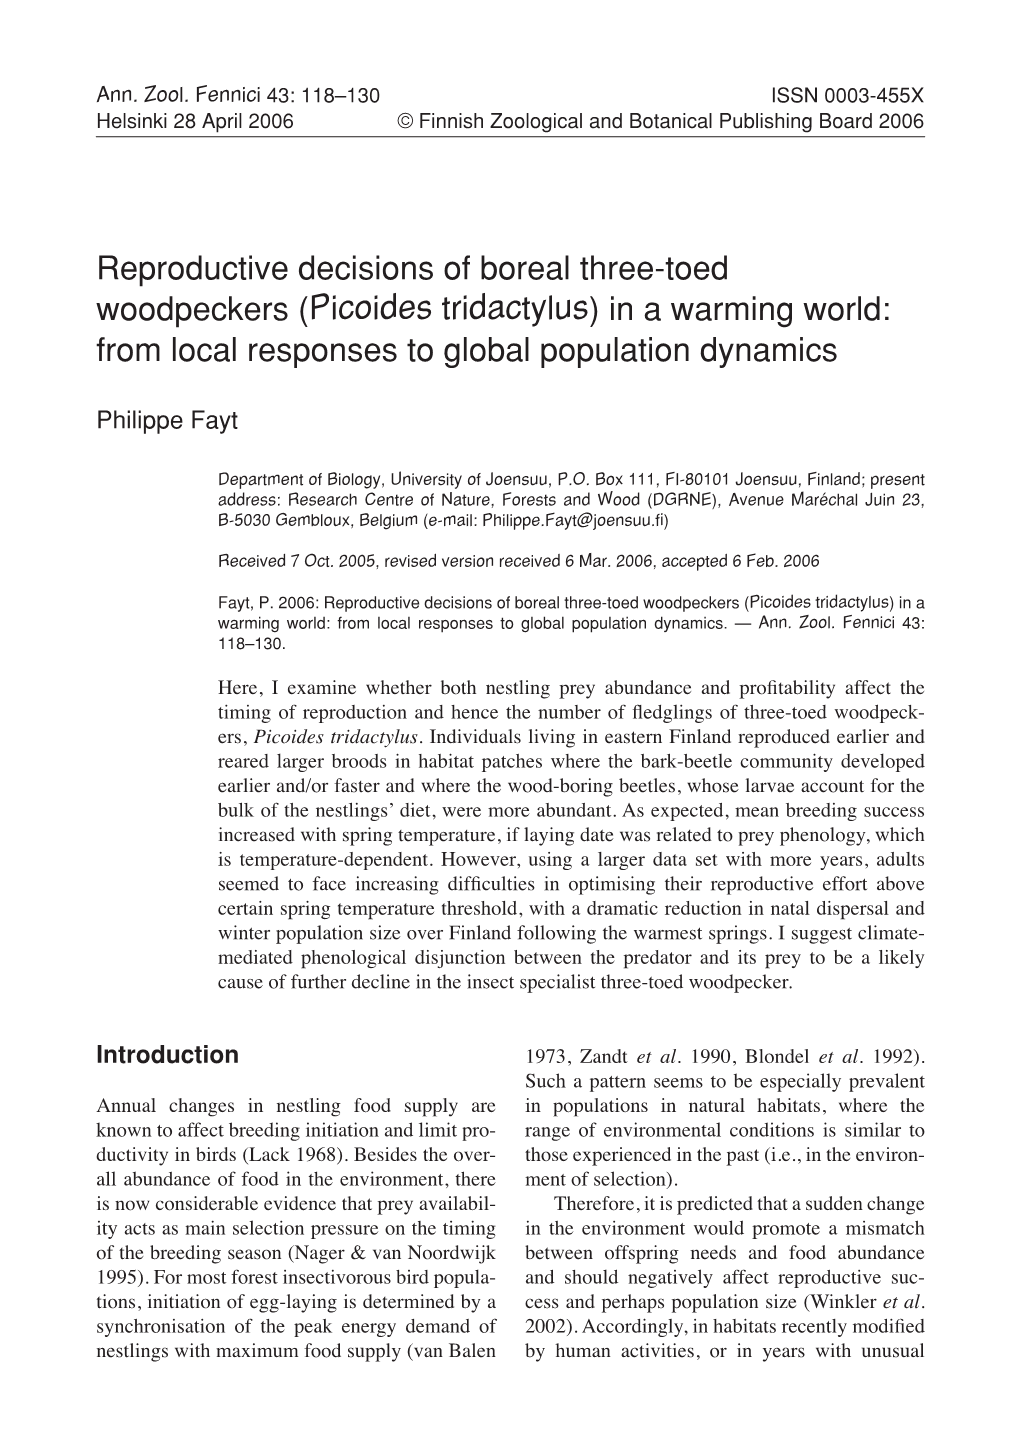 Reproductive Decisions of Boreal Three-Toed Woodpeckers (Picoides Tridactylus) in a Warming World: from Local Responses to Global Population Dynamics